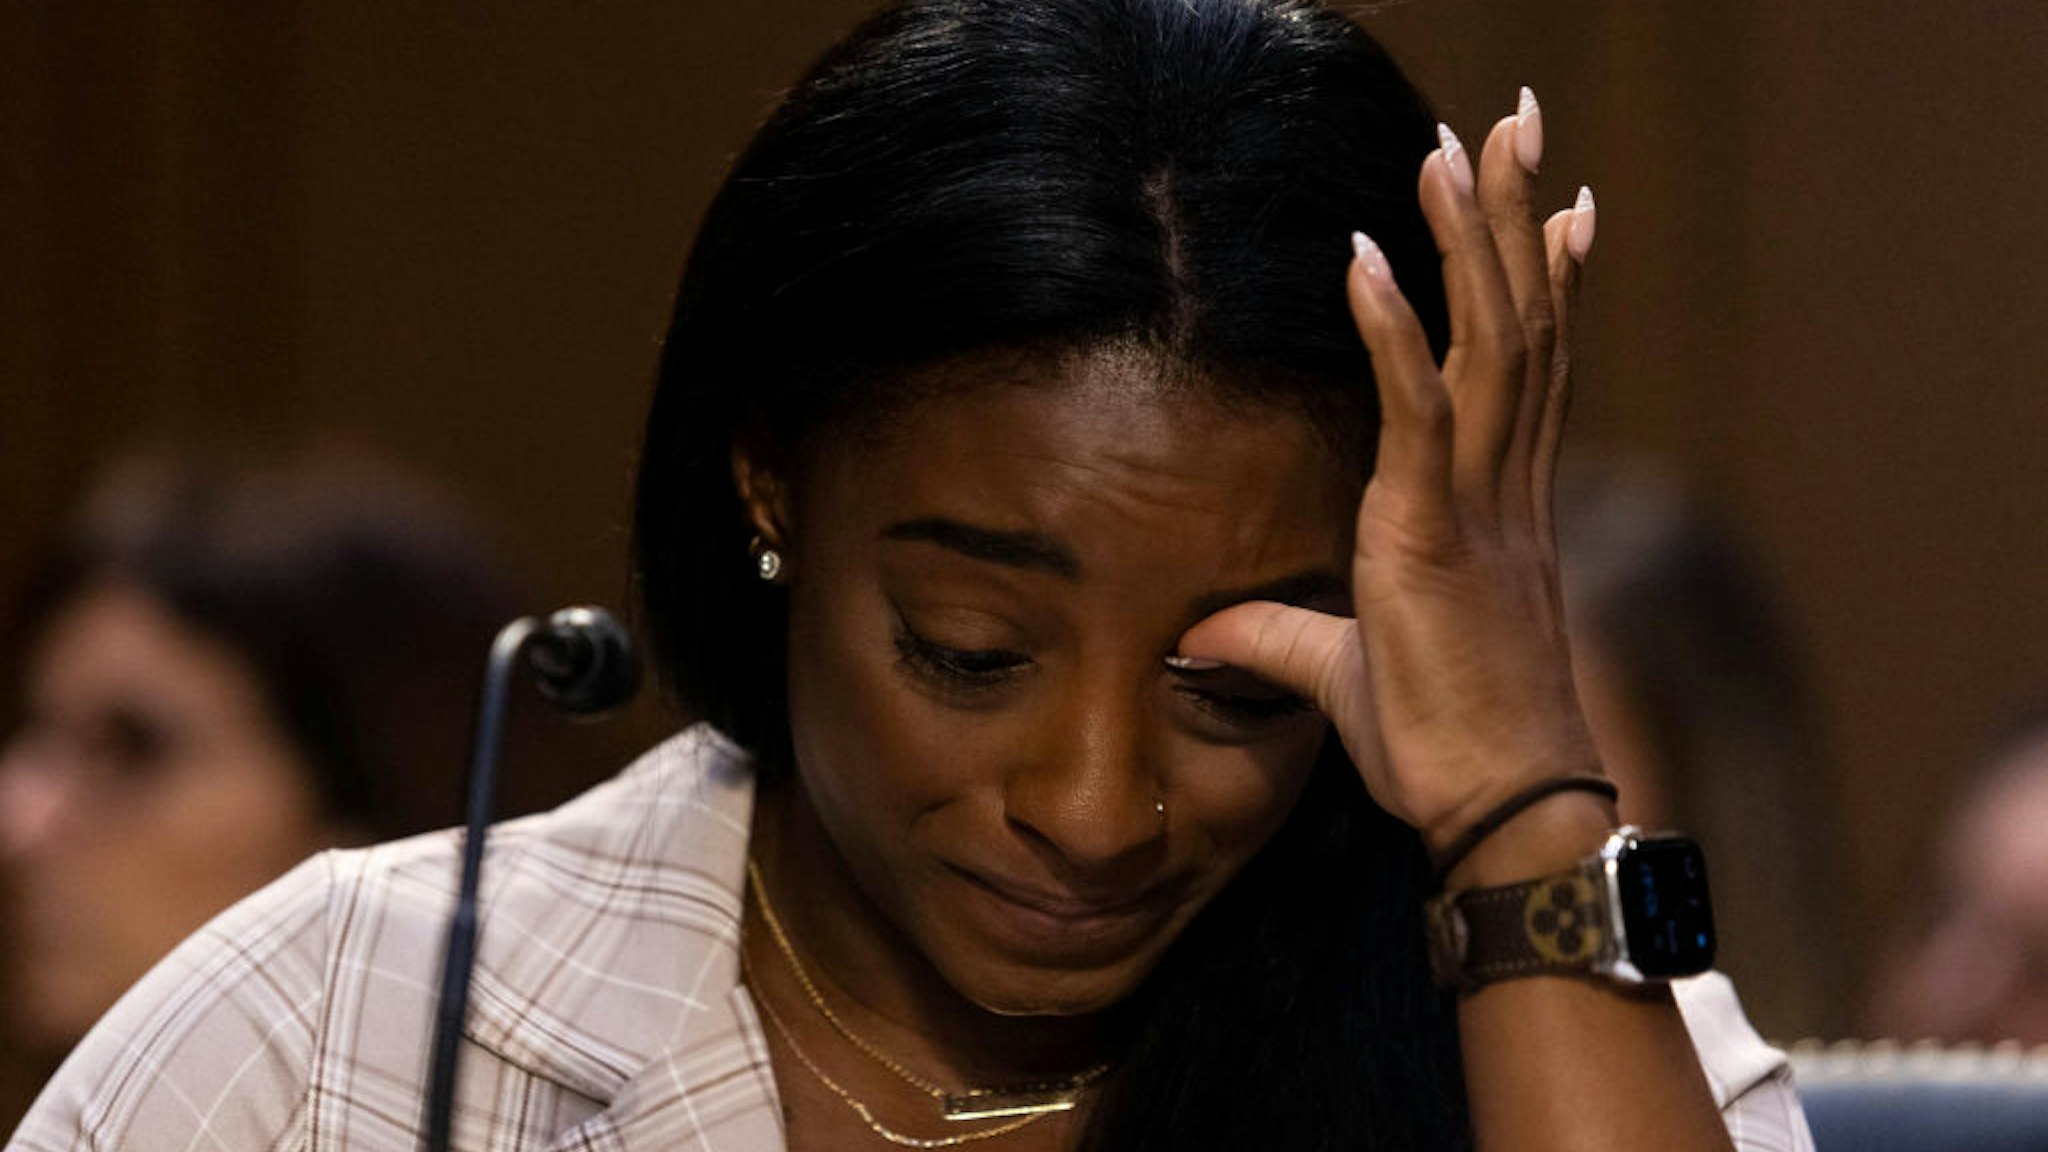 U.S. Olympic gymnast Simone Biles testifies during a Senate Judiciary hearing about the Inspector General's report on the FBI's handling of the Larry Nassar investigation on Capitol Hill, on September 15, 2021 in Washington, DC. Nassar was charged in 2016 with federal child pornography offenses and sexual abuse charges in Michigan. He is now serving decades in prison after hundreds of girls and women said he sexually abused them under the guise of medical treatment when he worked for Michigan State and Indiana-based USA Gymnastics, which trains Olympians. (Photo by Graeme Jennings-Pool/Getty Images)